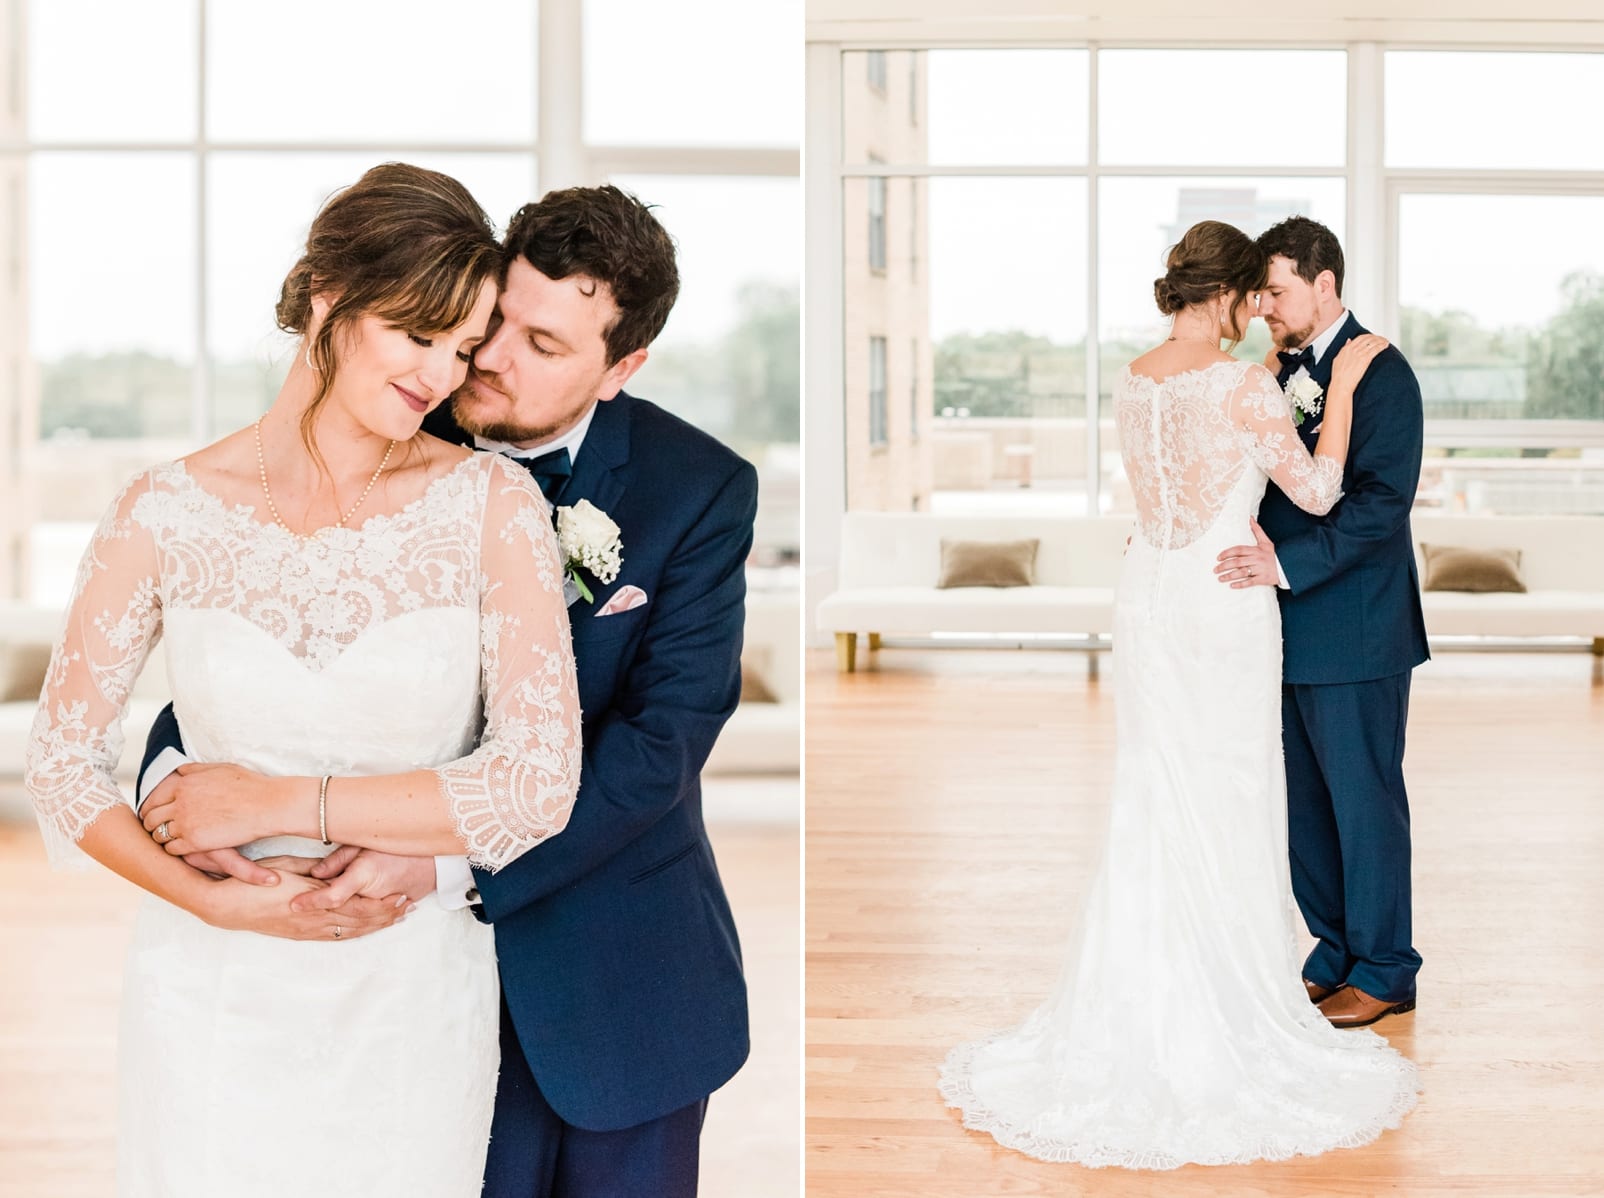 The Glass Box groom with his arms wrapped around his bride's waist photo